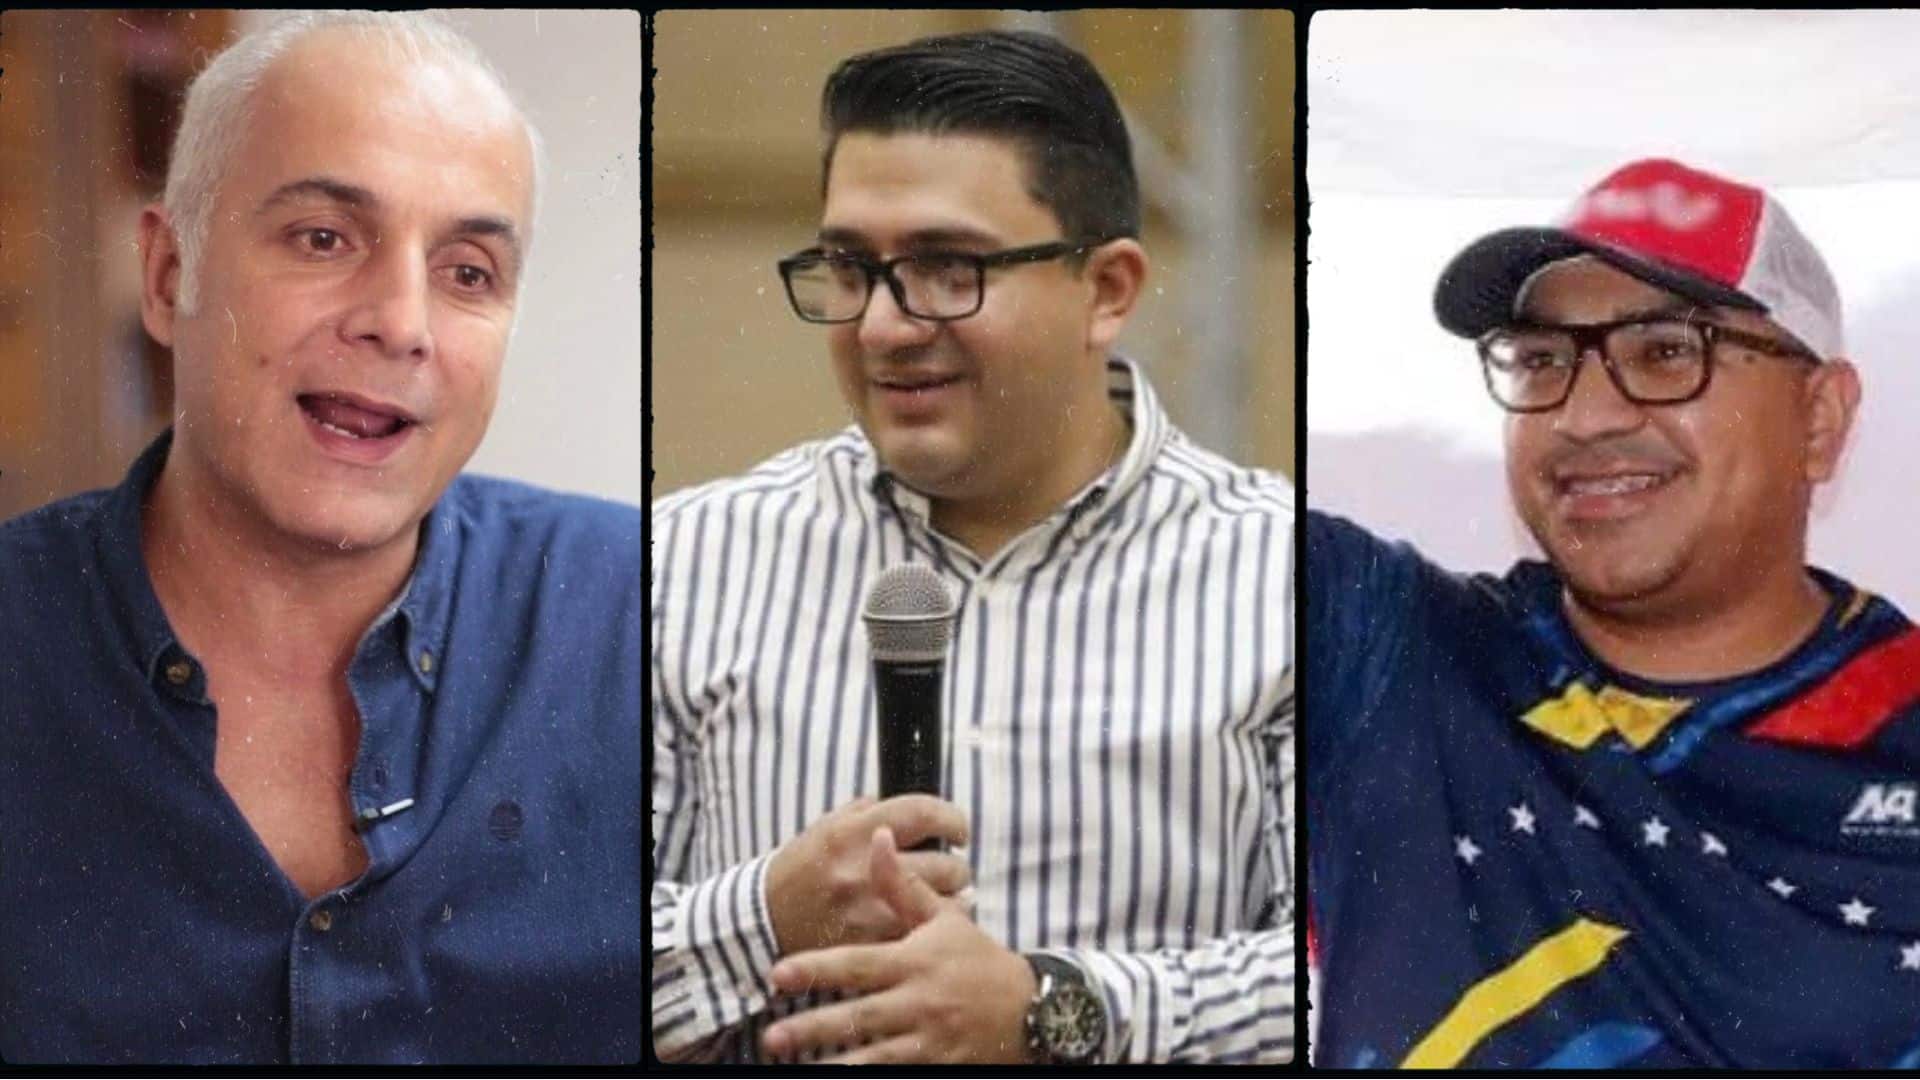 The three high-level officials detained by the anti-corruption police in Venezuela. From left to right: Cristóbal Cornieles, Joselit Ramírez, and Pedro Hernández. Photo composition by Orinoco Tribune.